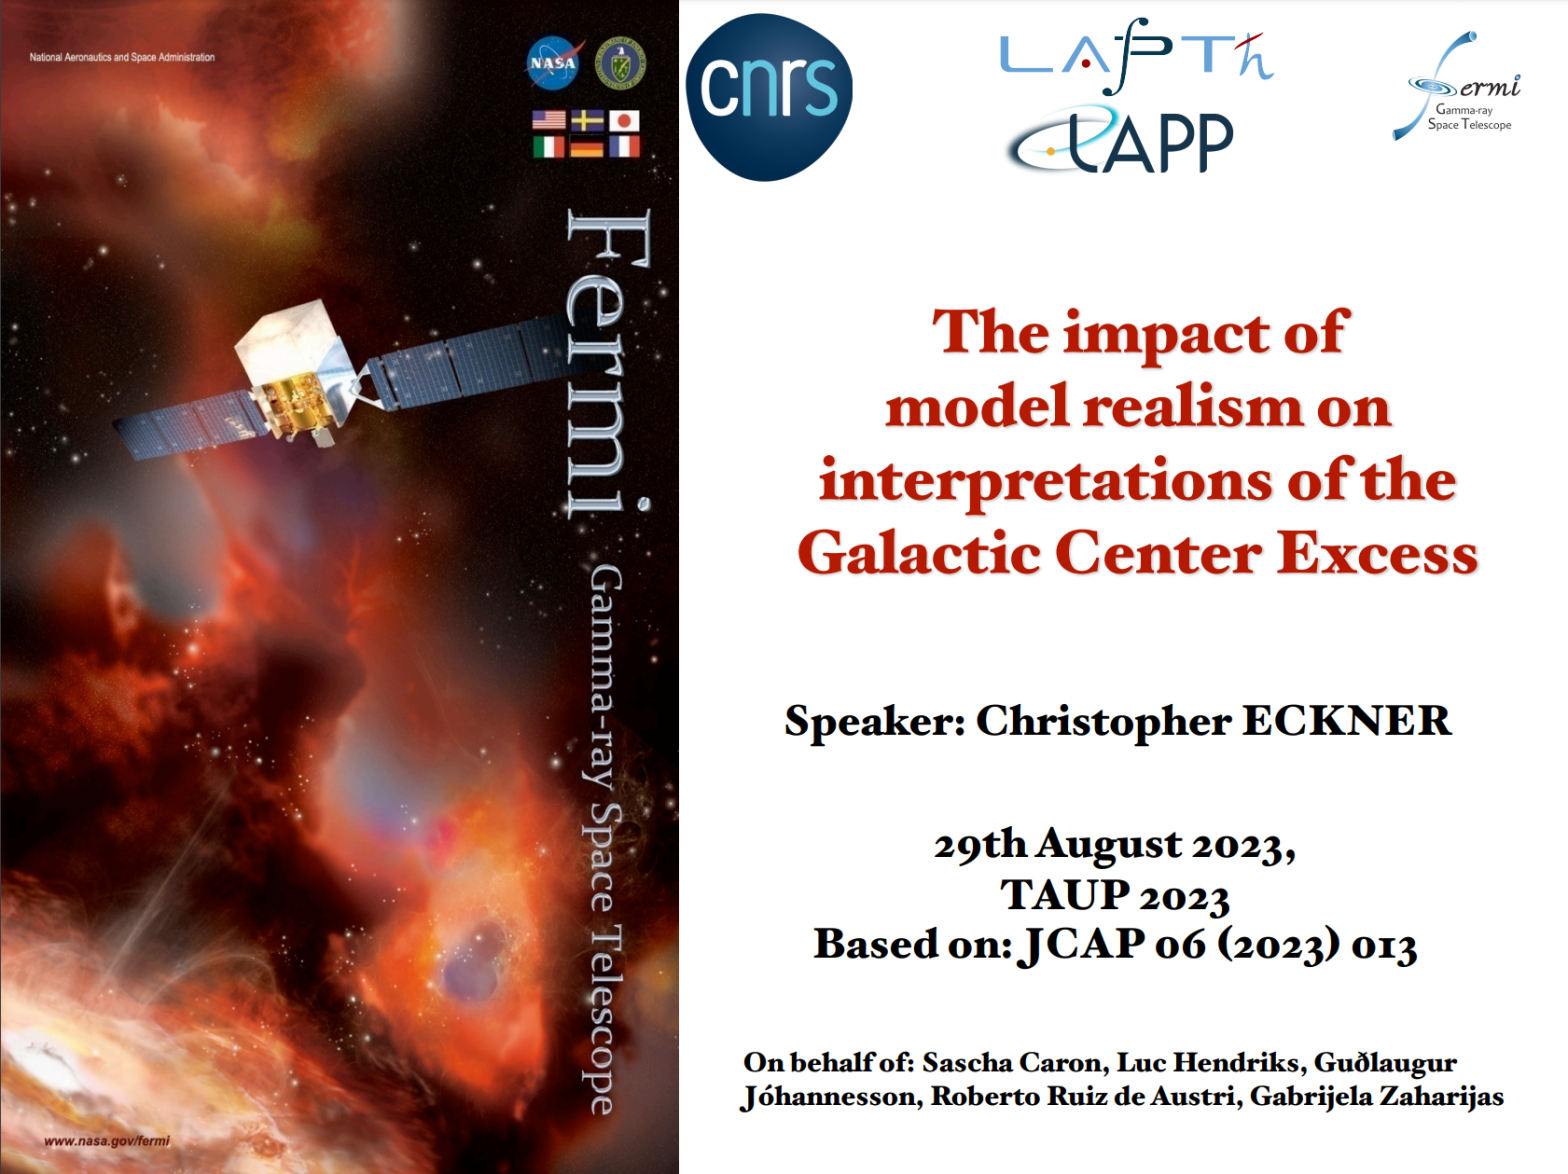 The impact of model realism on interpretations of the Galactic Center Excess